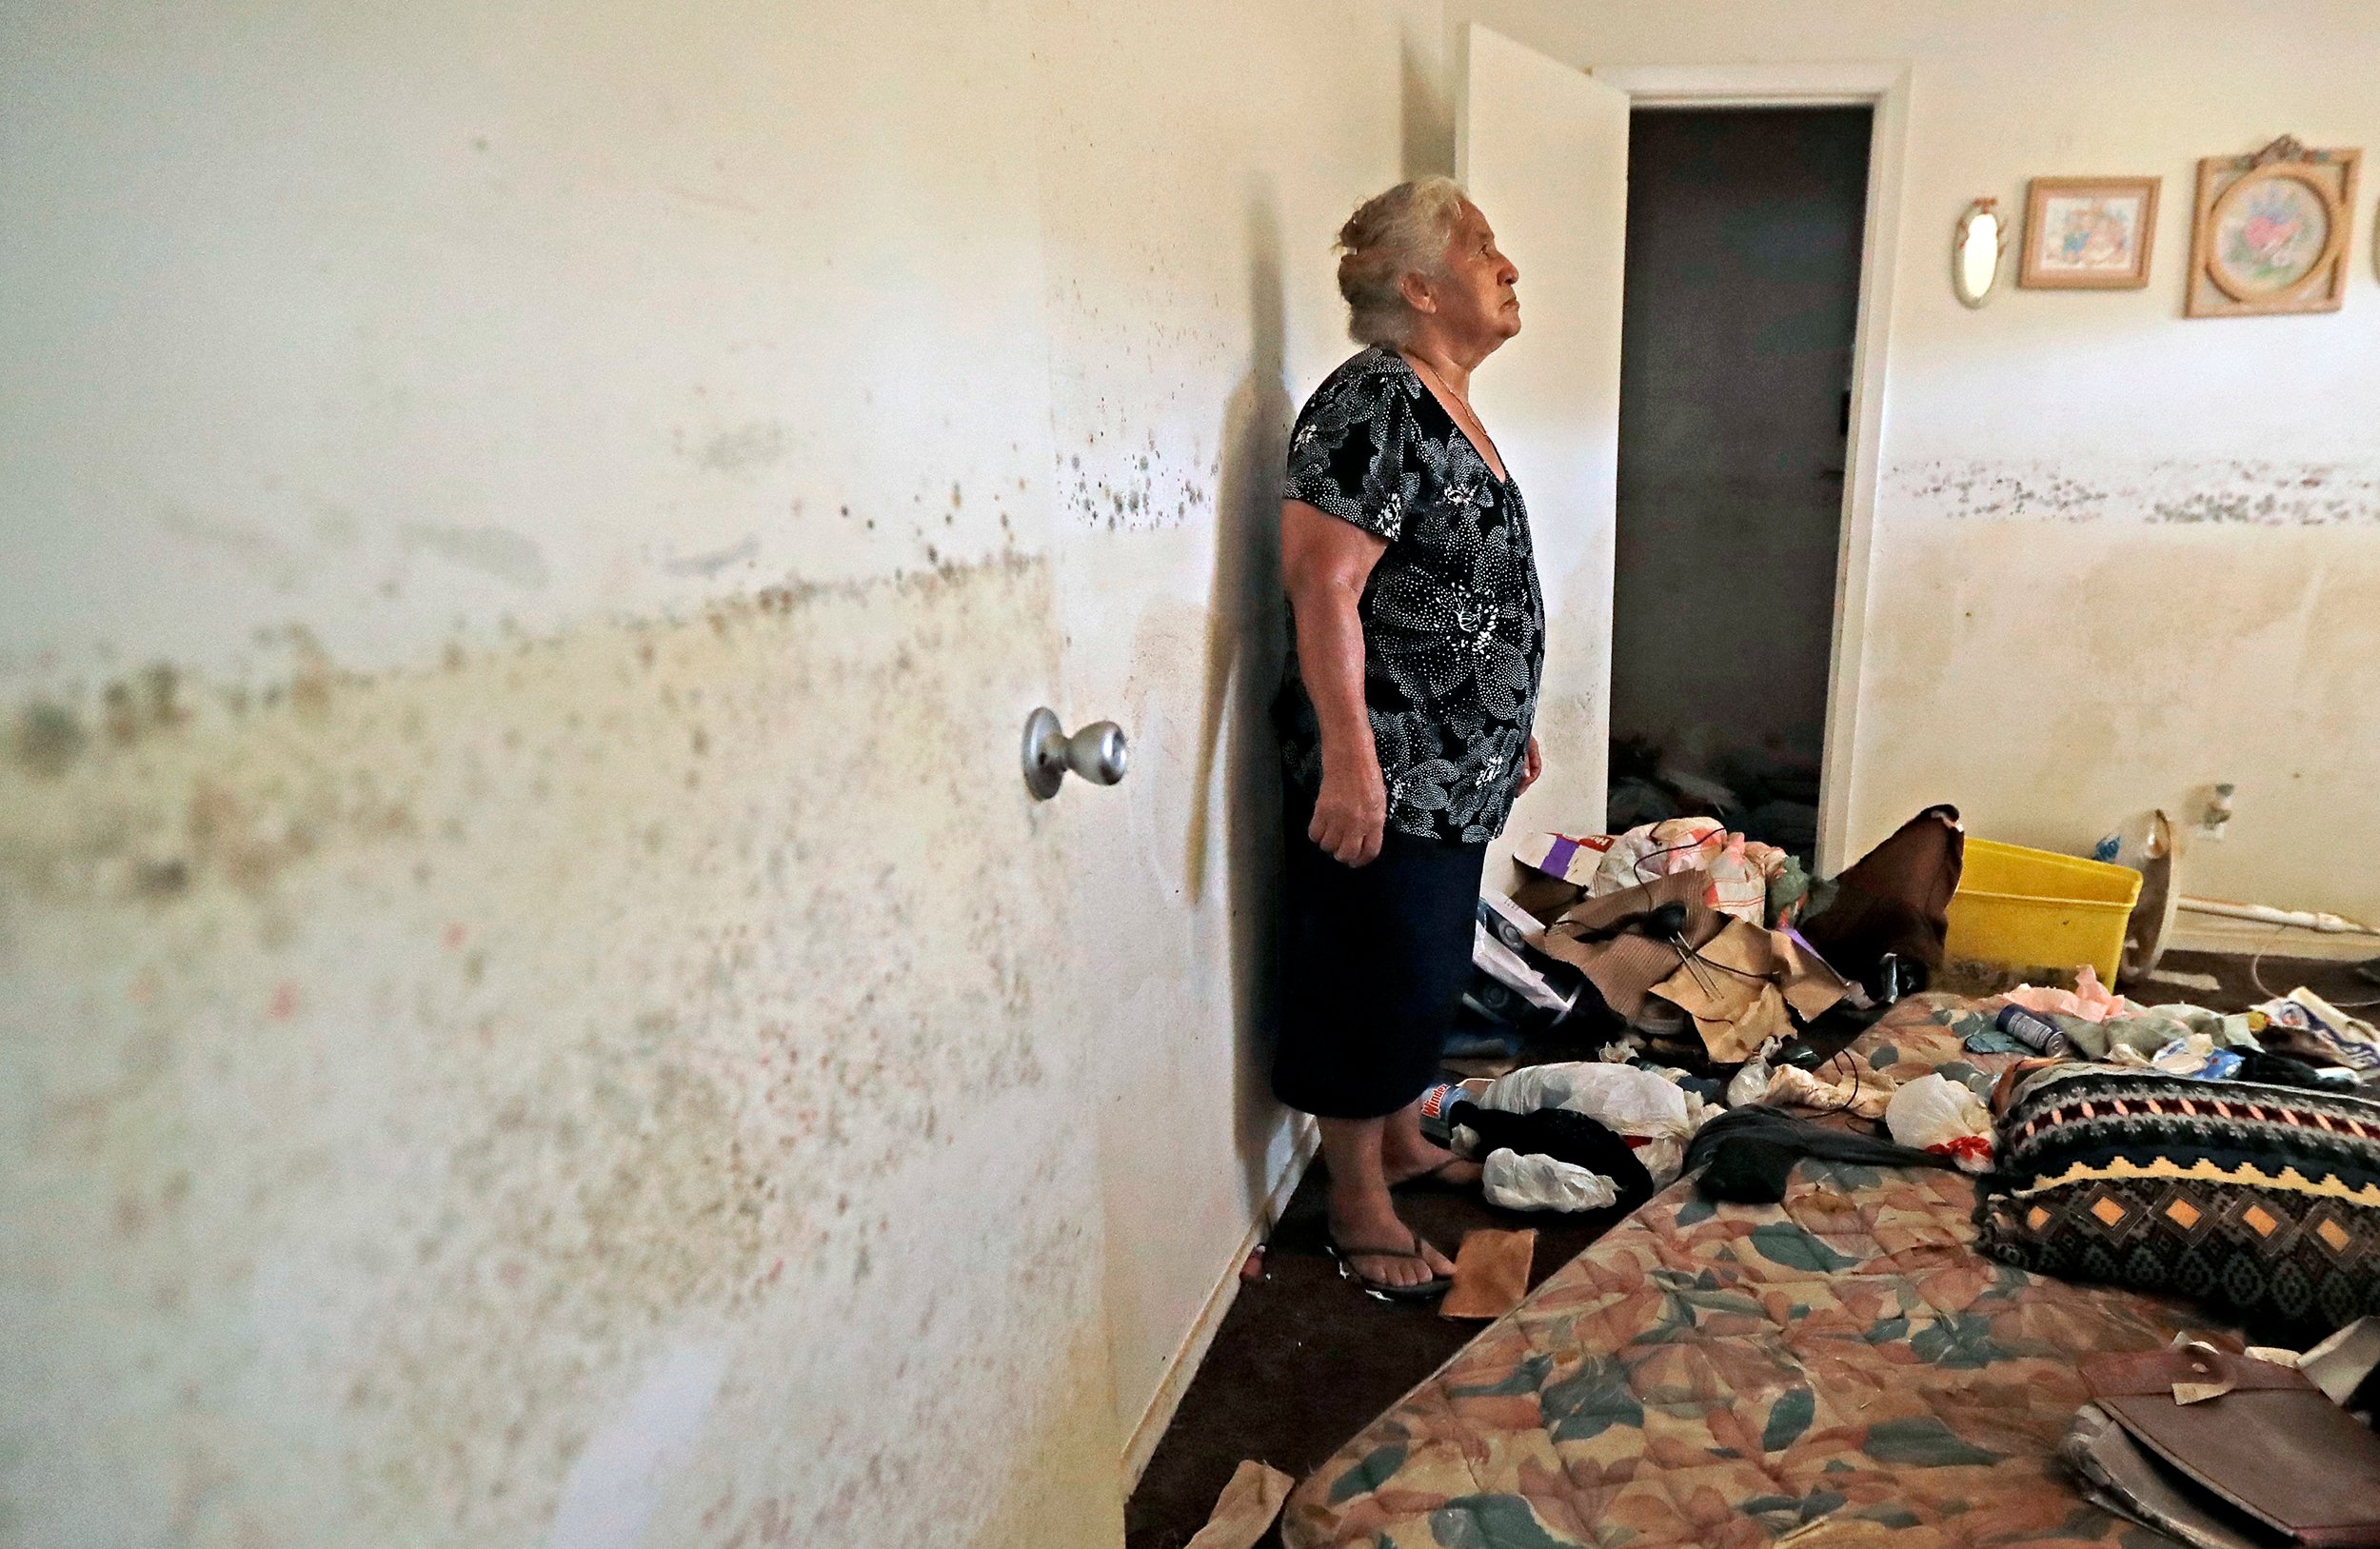 Flood victim Florentina Amaya, 71, looks at the mold growing inside her home in the aftermath of Hurricane Harvey, Tuesday, Sept. 5, 2017, in Houston.